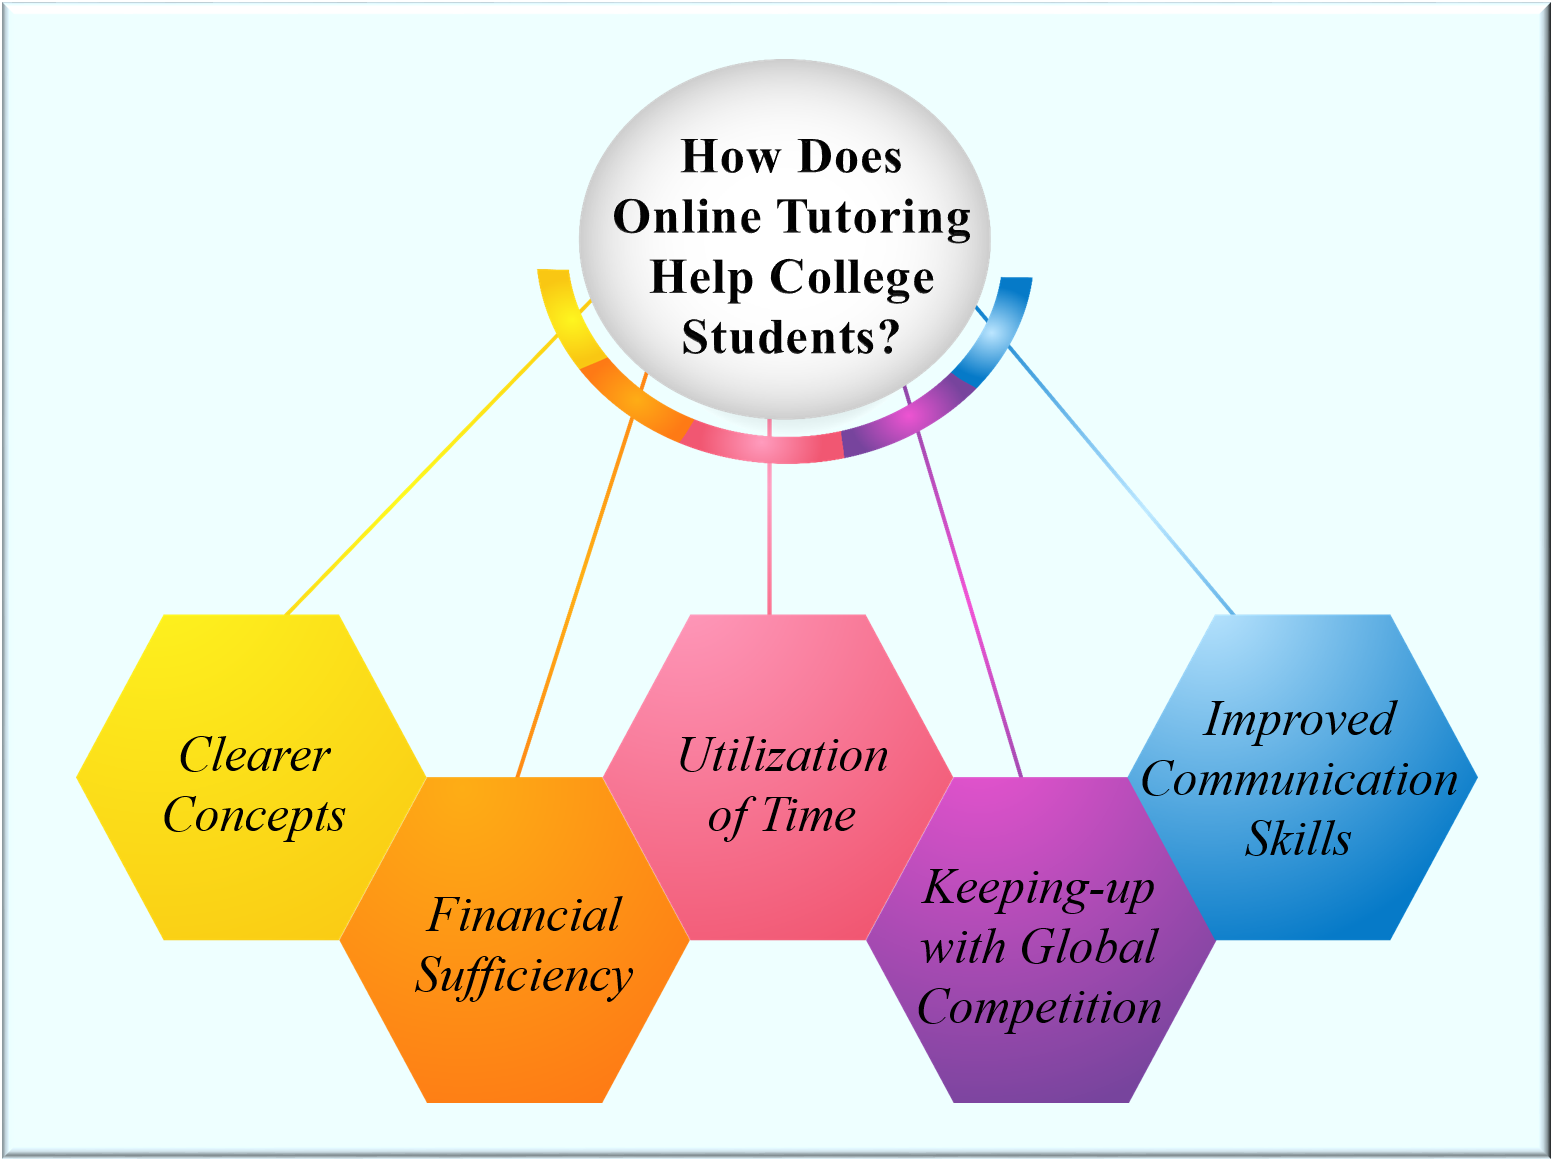 How Does Online Tutoring Help College Students?